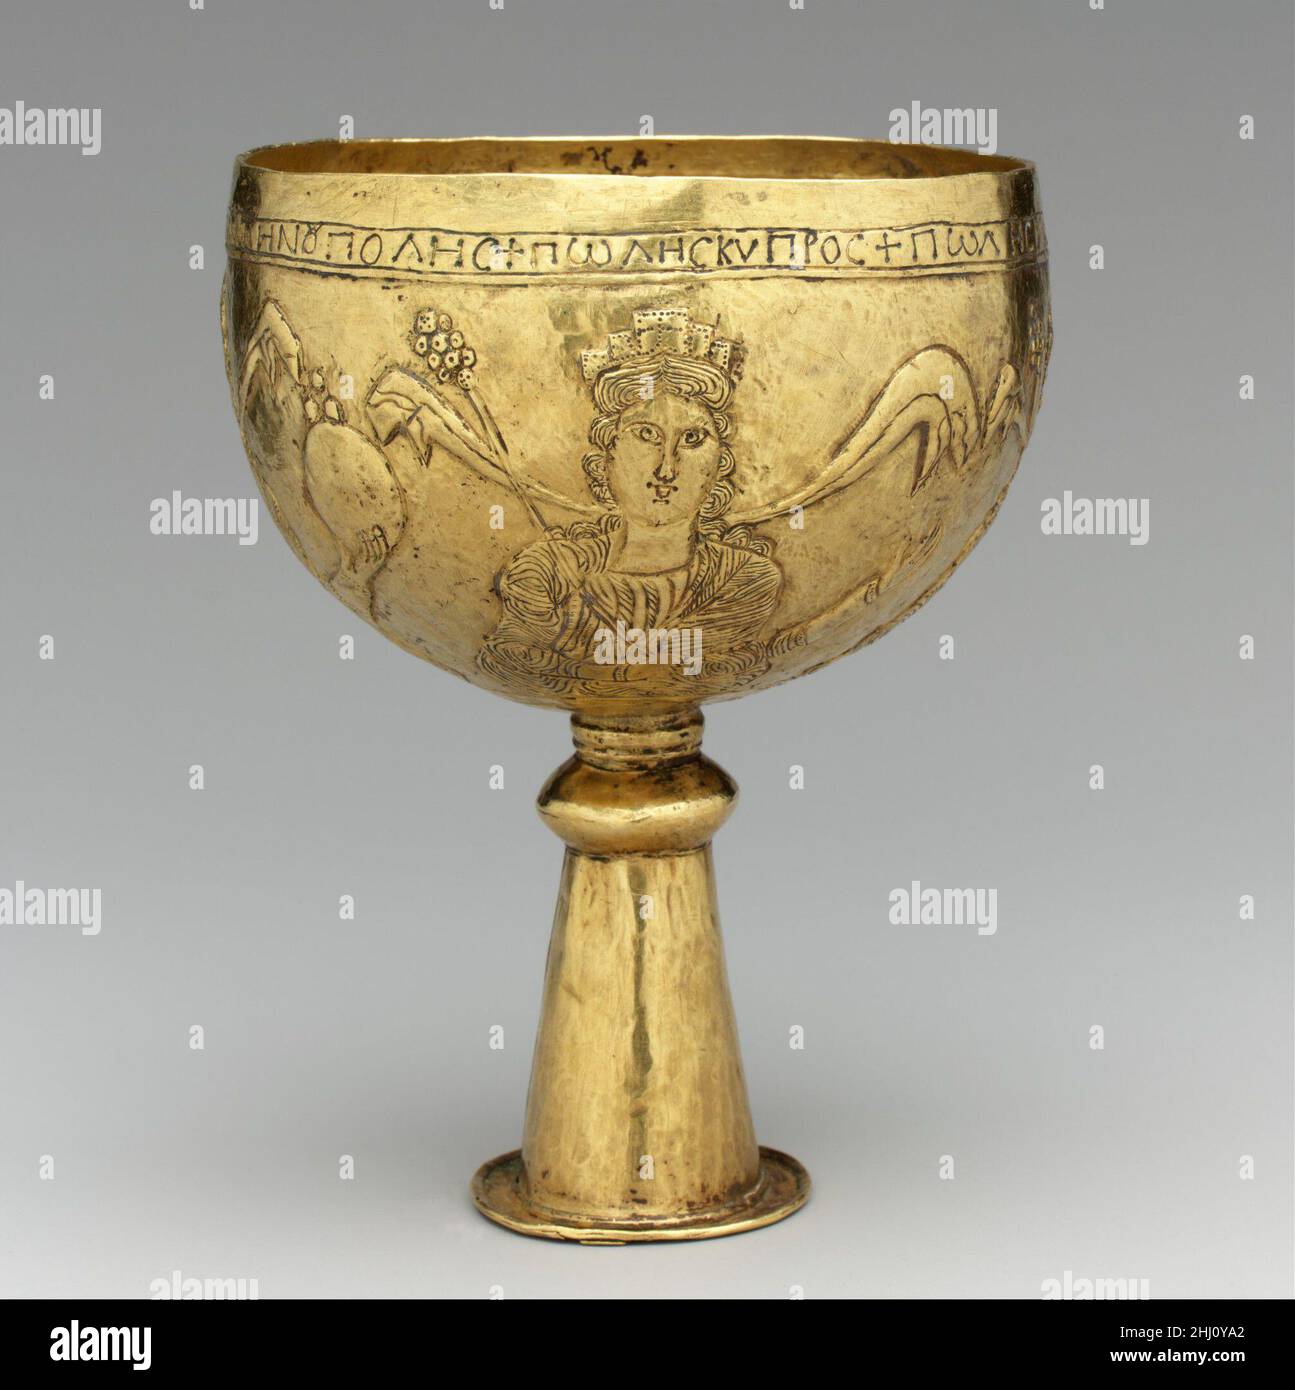 Gold Goblet with Personifications of Cyprus, Rome, Constantinople, and Alexandria 700s Avar or Byzantine This goblet is decorated with female personifications of four major ecclesiastical centers in the Byzantine world. The awkwardly written identifications suggest that this goblet was an Avar attempt to imitate a Byzantine chalice.The AvarsThe Avars were a nomadic tribe of mounted warriors from the Eurasian steppe. The Byzantine emperor Justinian negotiated with them in the sixth century to protect the Empire’s northern border along the Black Sea. Emboldened by their subjugation of numerous t Stock Photo